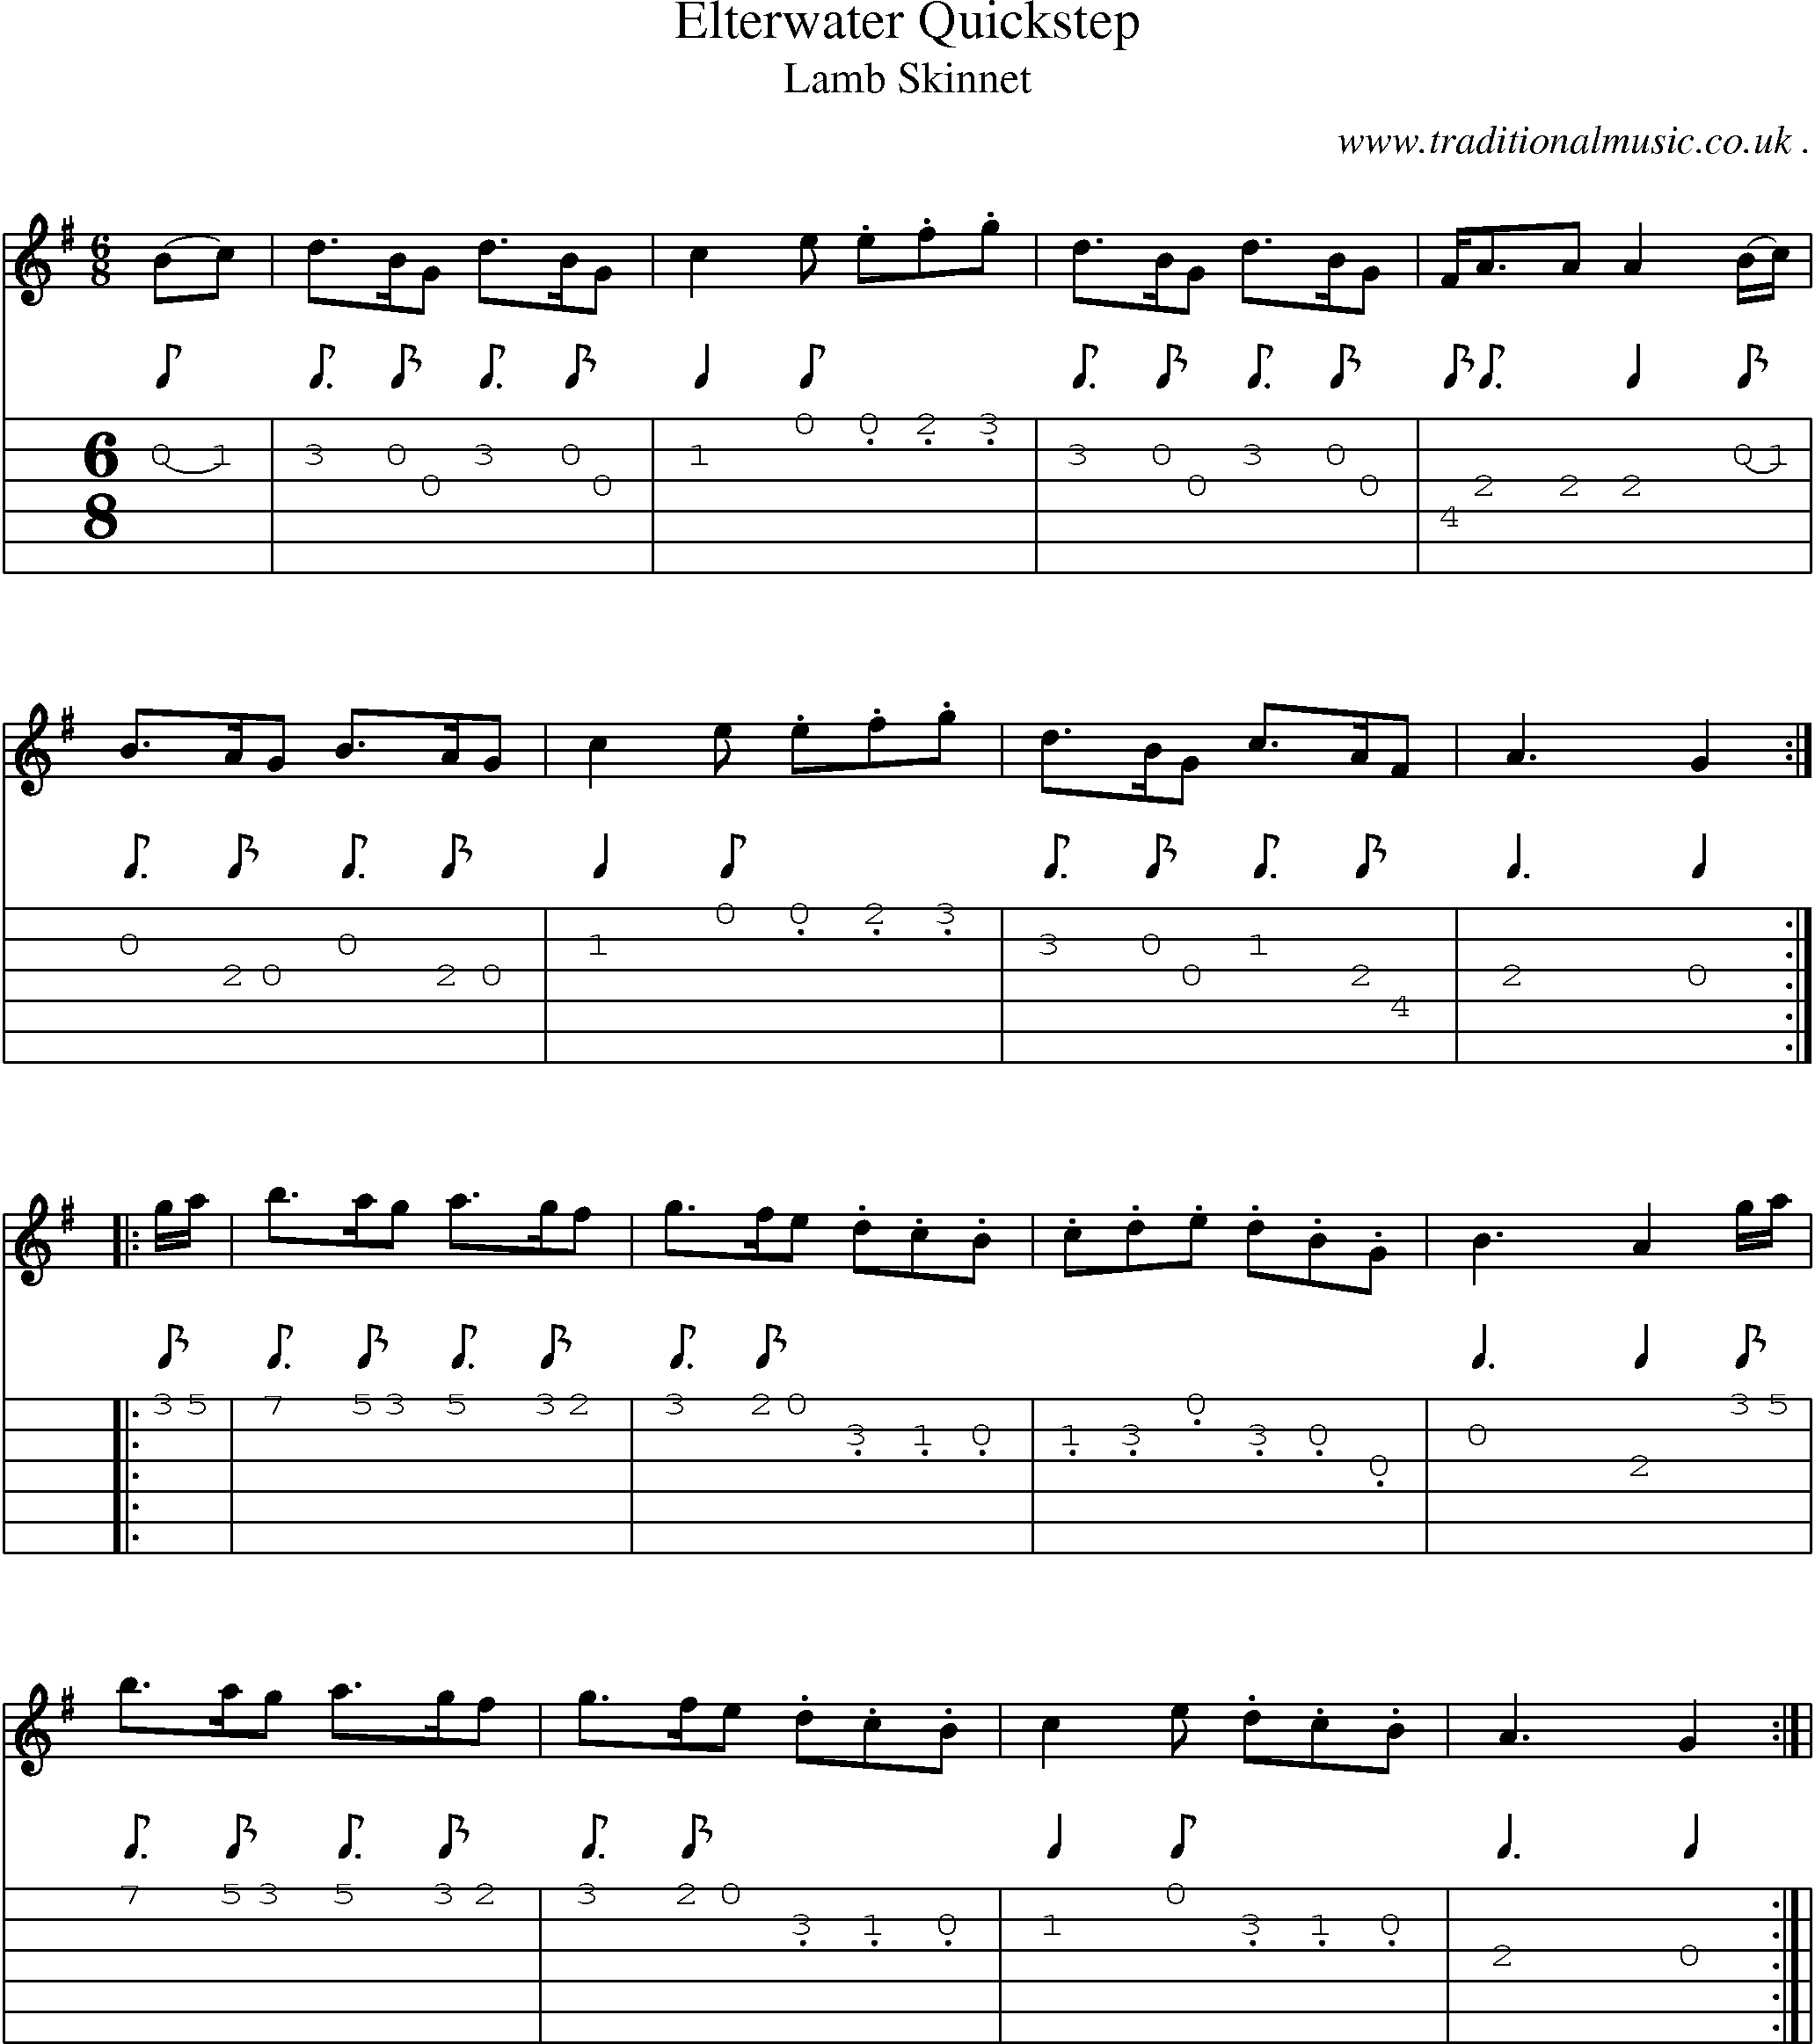 Sheet-Music and Guitar Tabs for Elterwater Quickstep